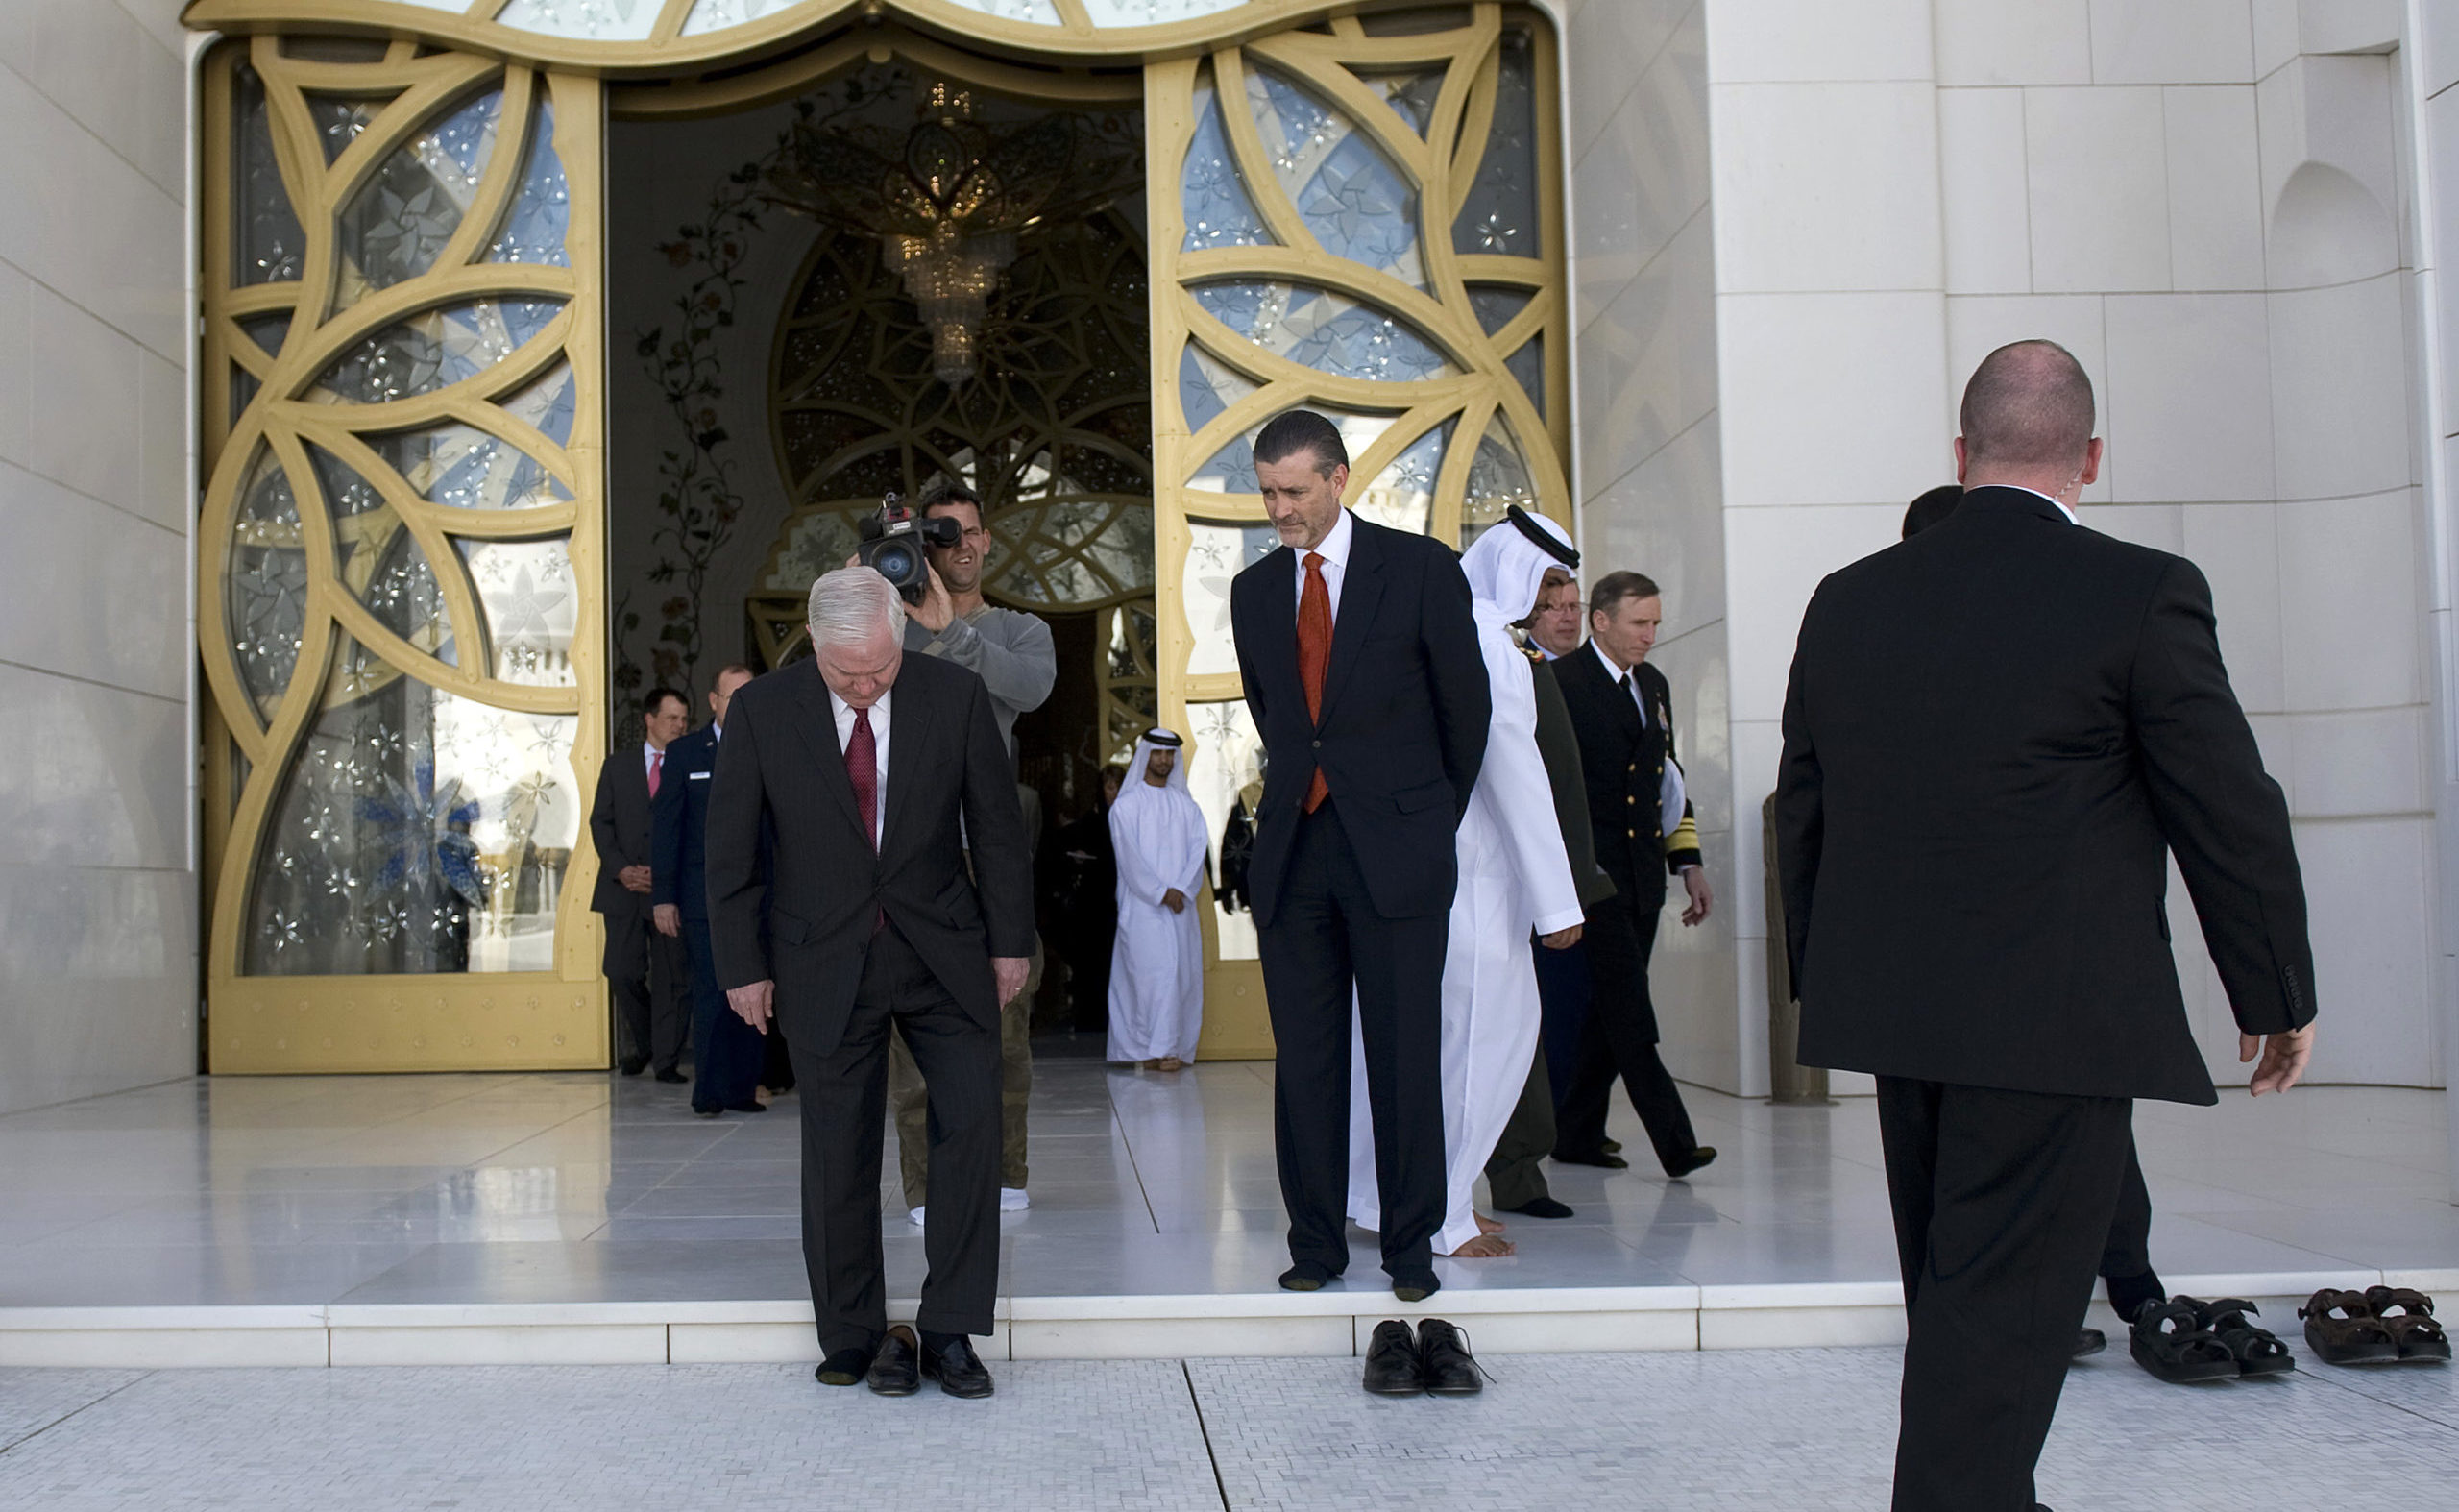 U.S Defense Secretary Robert Gates (L) and U.S Ambassador to the UAE Richard Olson (centre R) put on their shoes after touring through Sheikh Zayed Mosque in Abu Dhabi March 11, 2010.